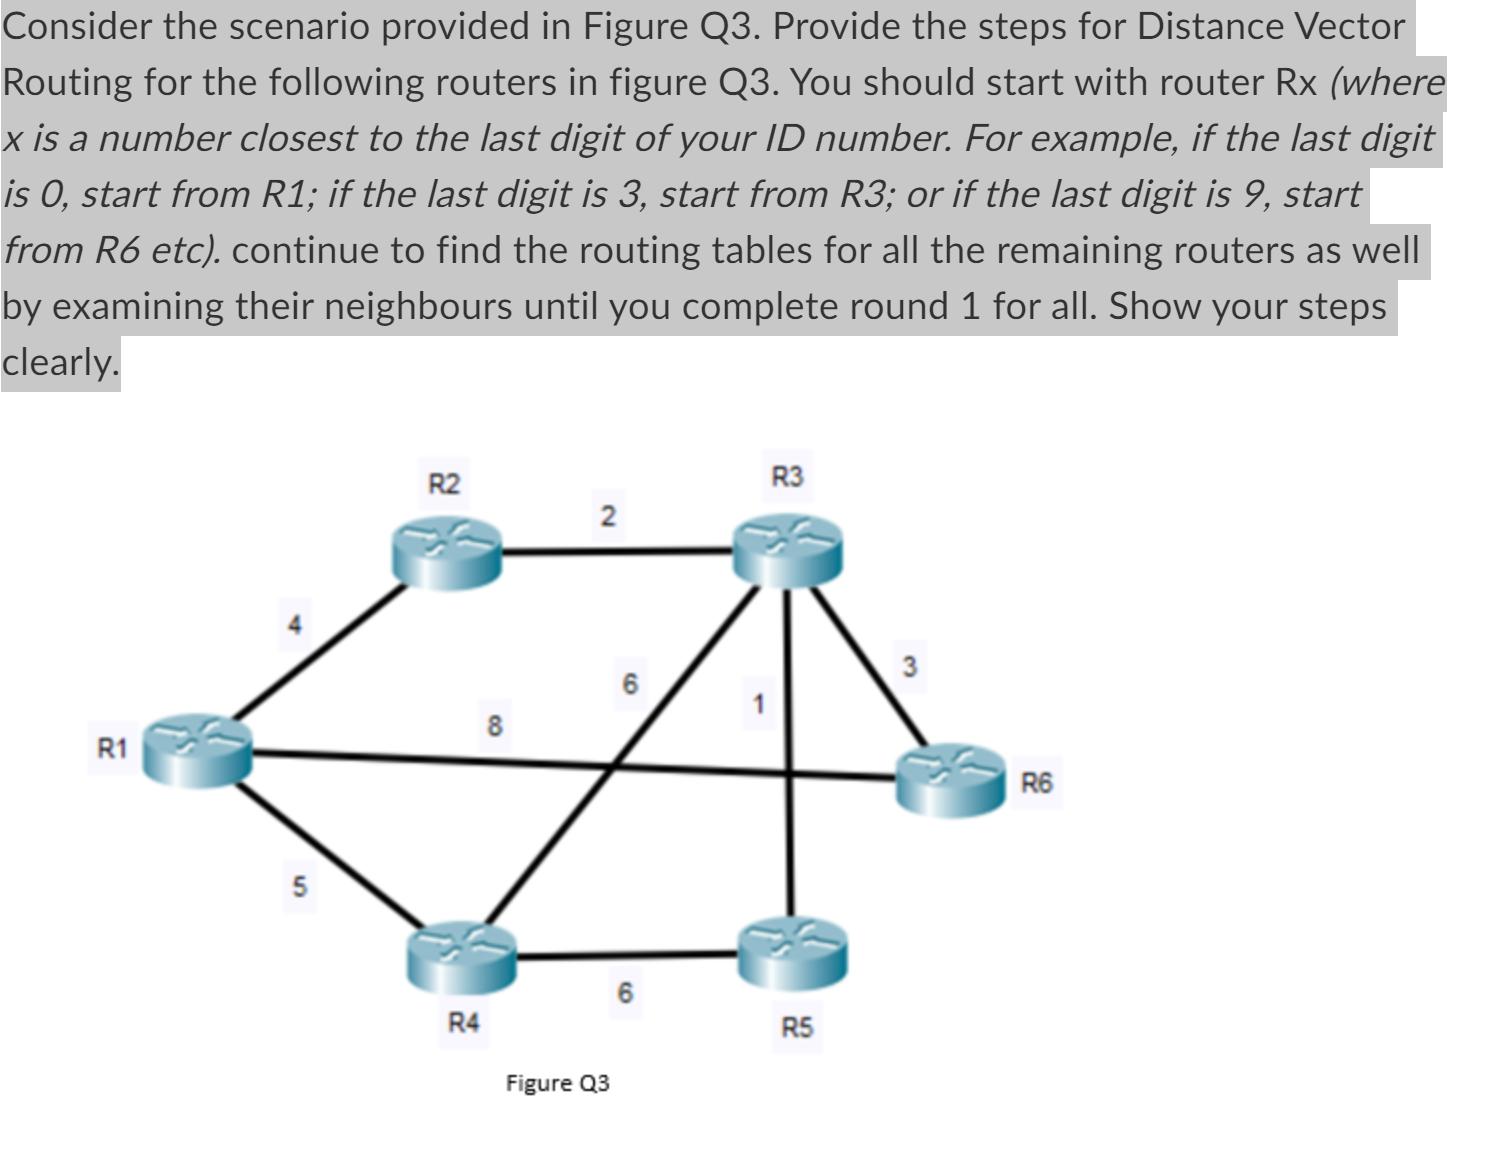 Consider the scenario provided in Figure Q3. Provide the steps for Distance Vector Routing for the following